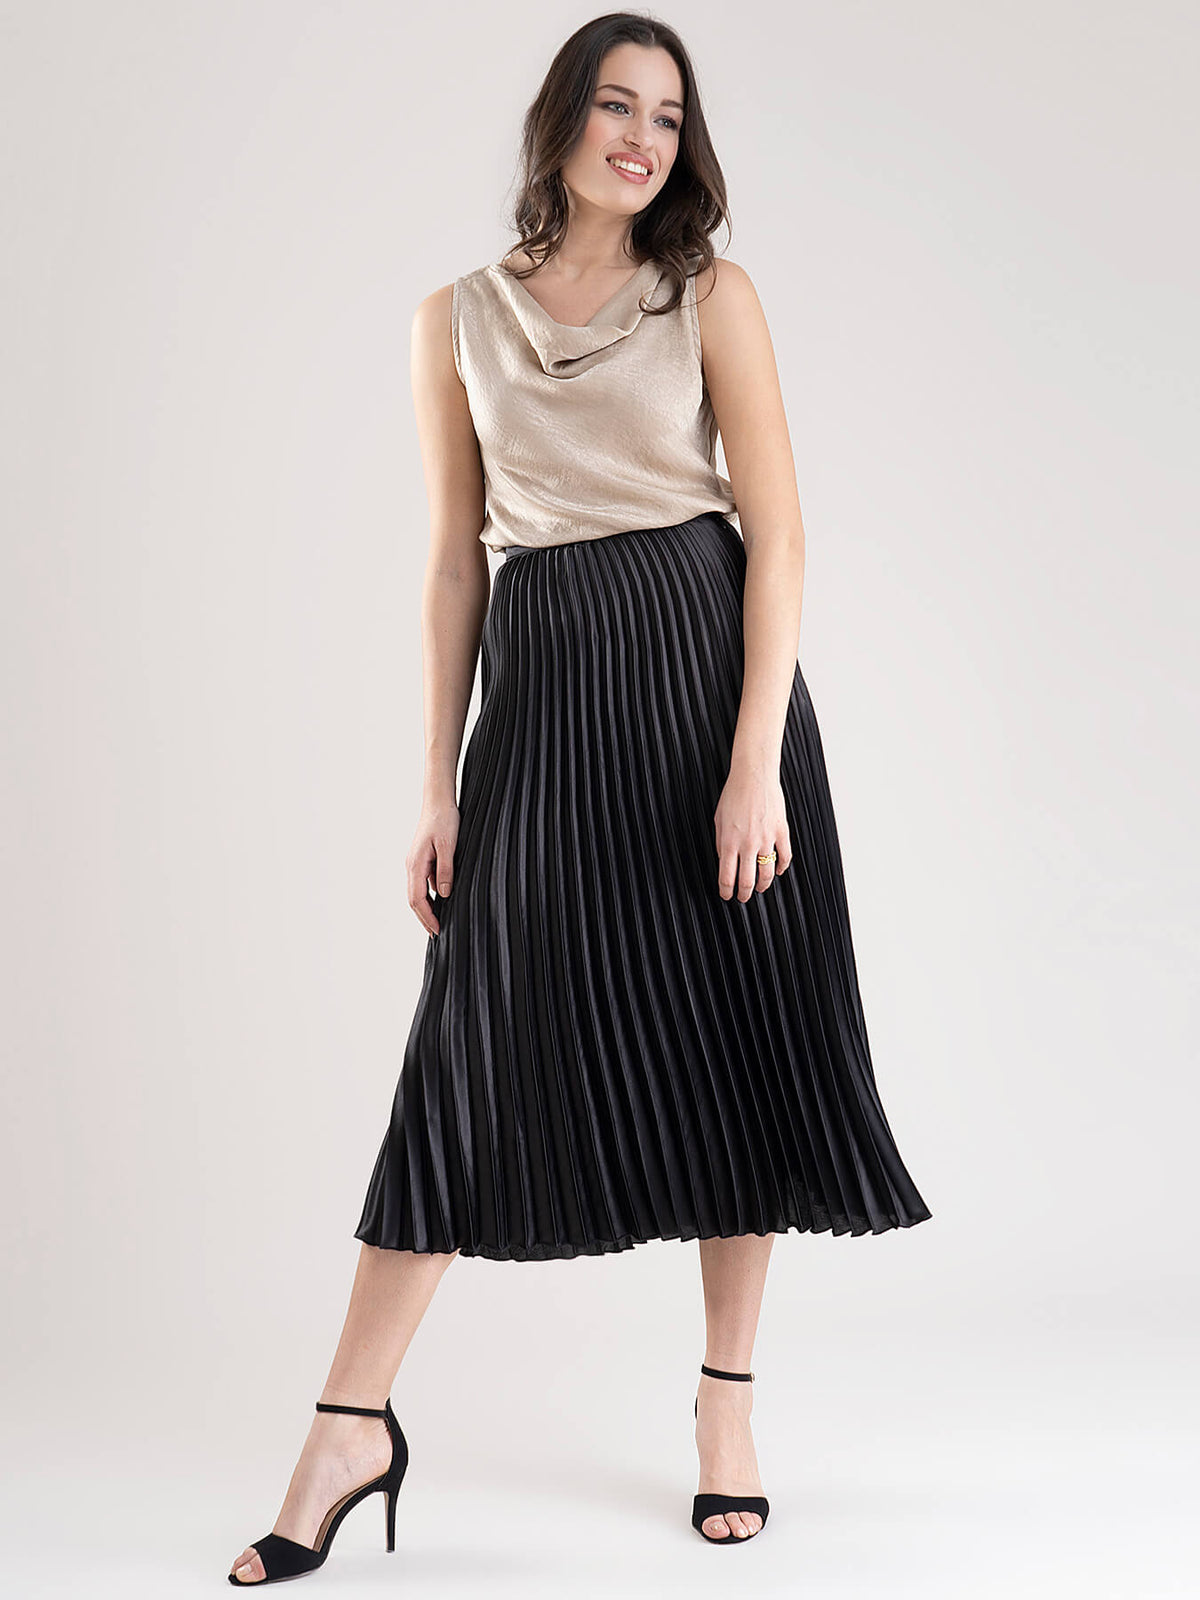 Satin Cowl Neck Top And Pleated Satin Skirt Co-ord - Beige And Black